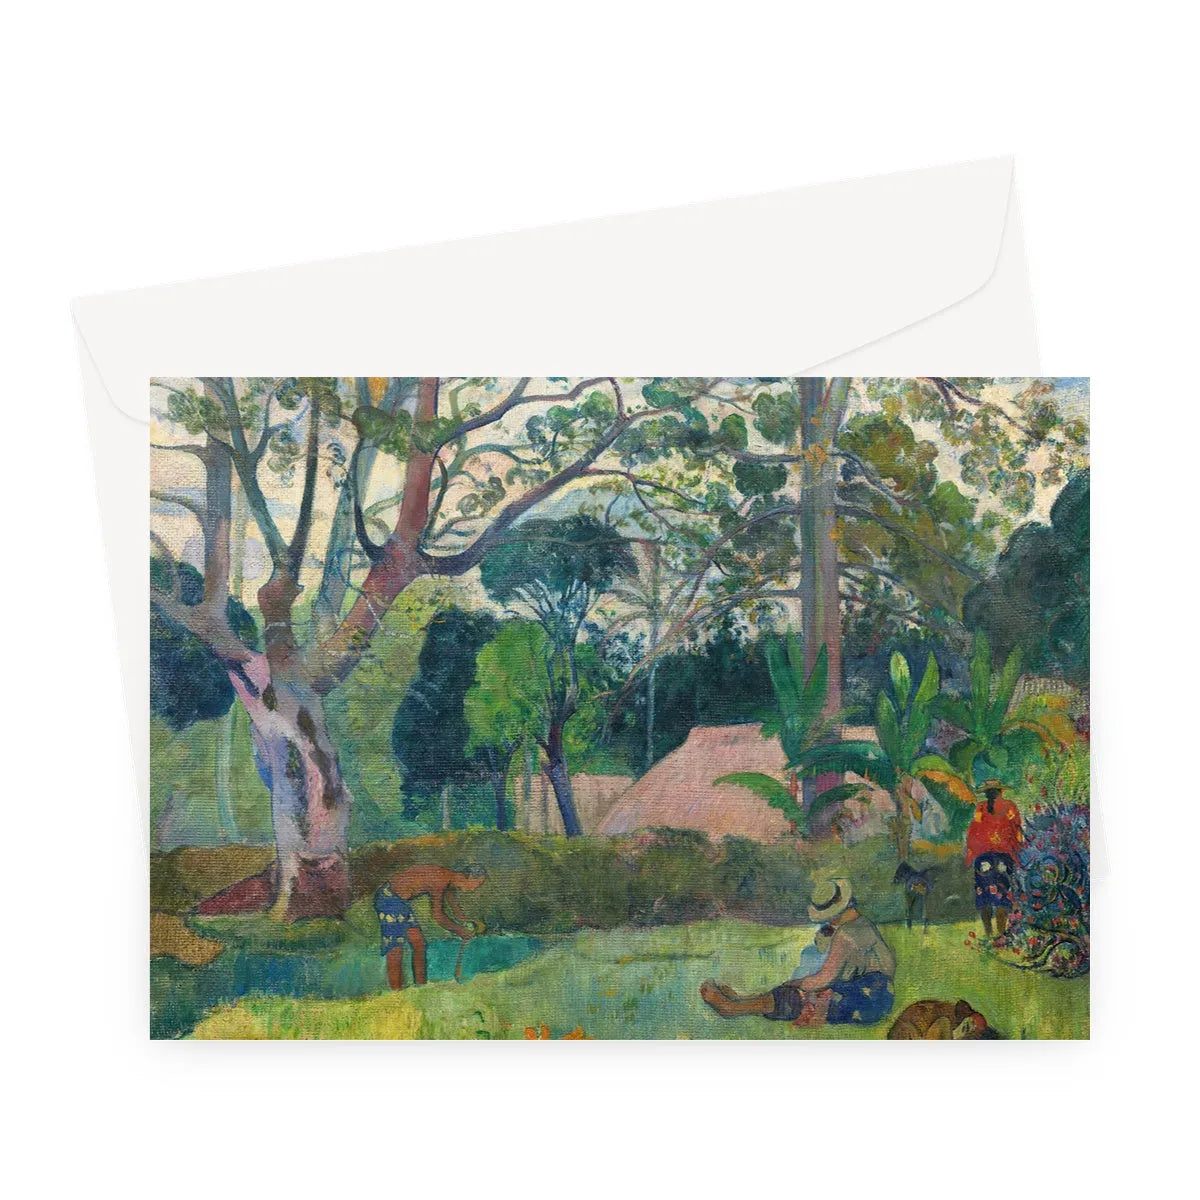 The Big Tree By Paul Gauguin Greeting Card - A5 Landscape / 1 Card - Greeting & Note Cards - Aesthetic Art